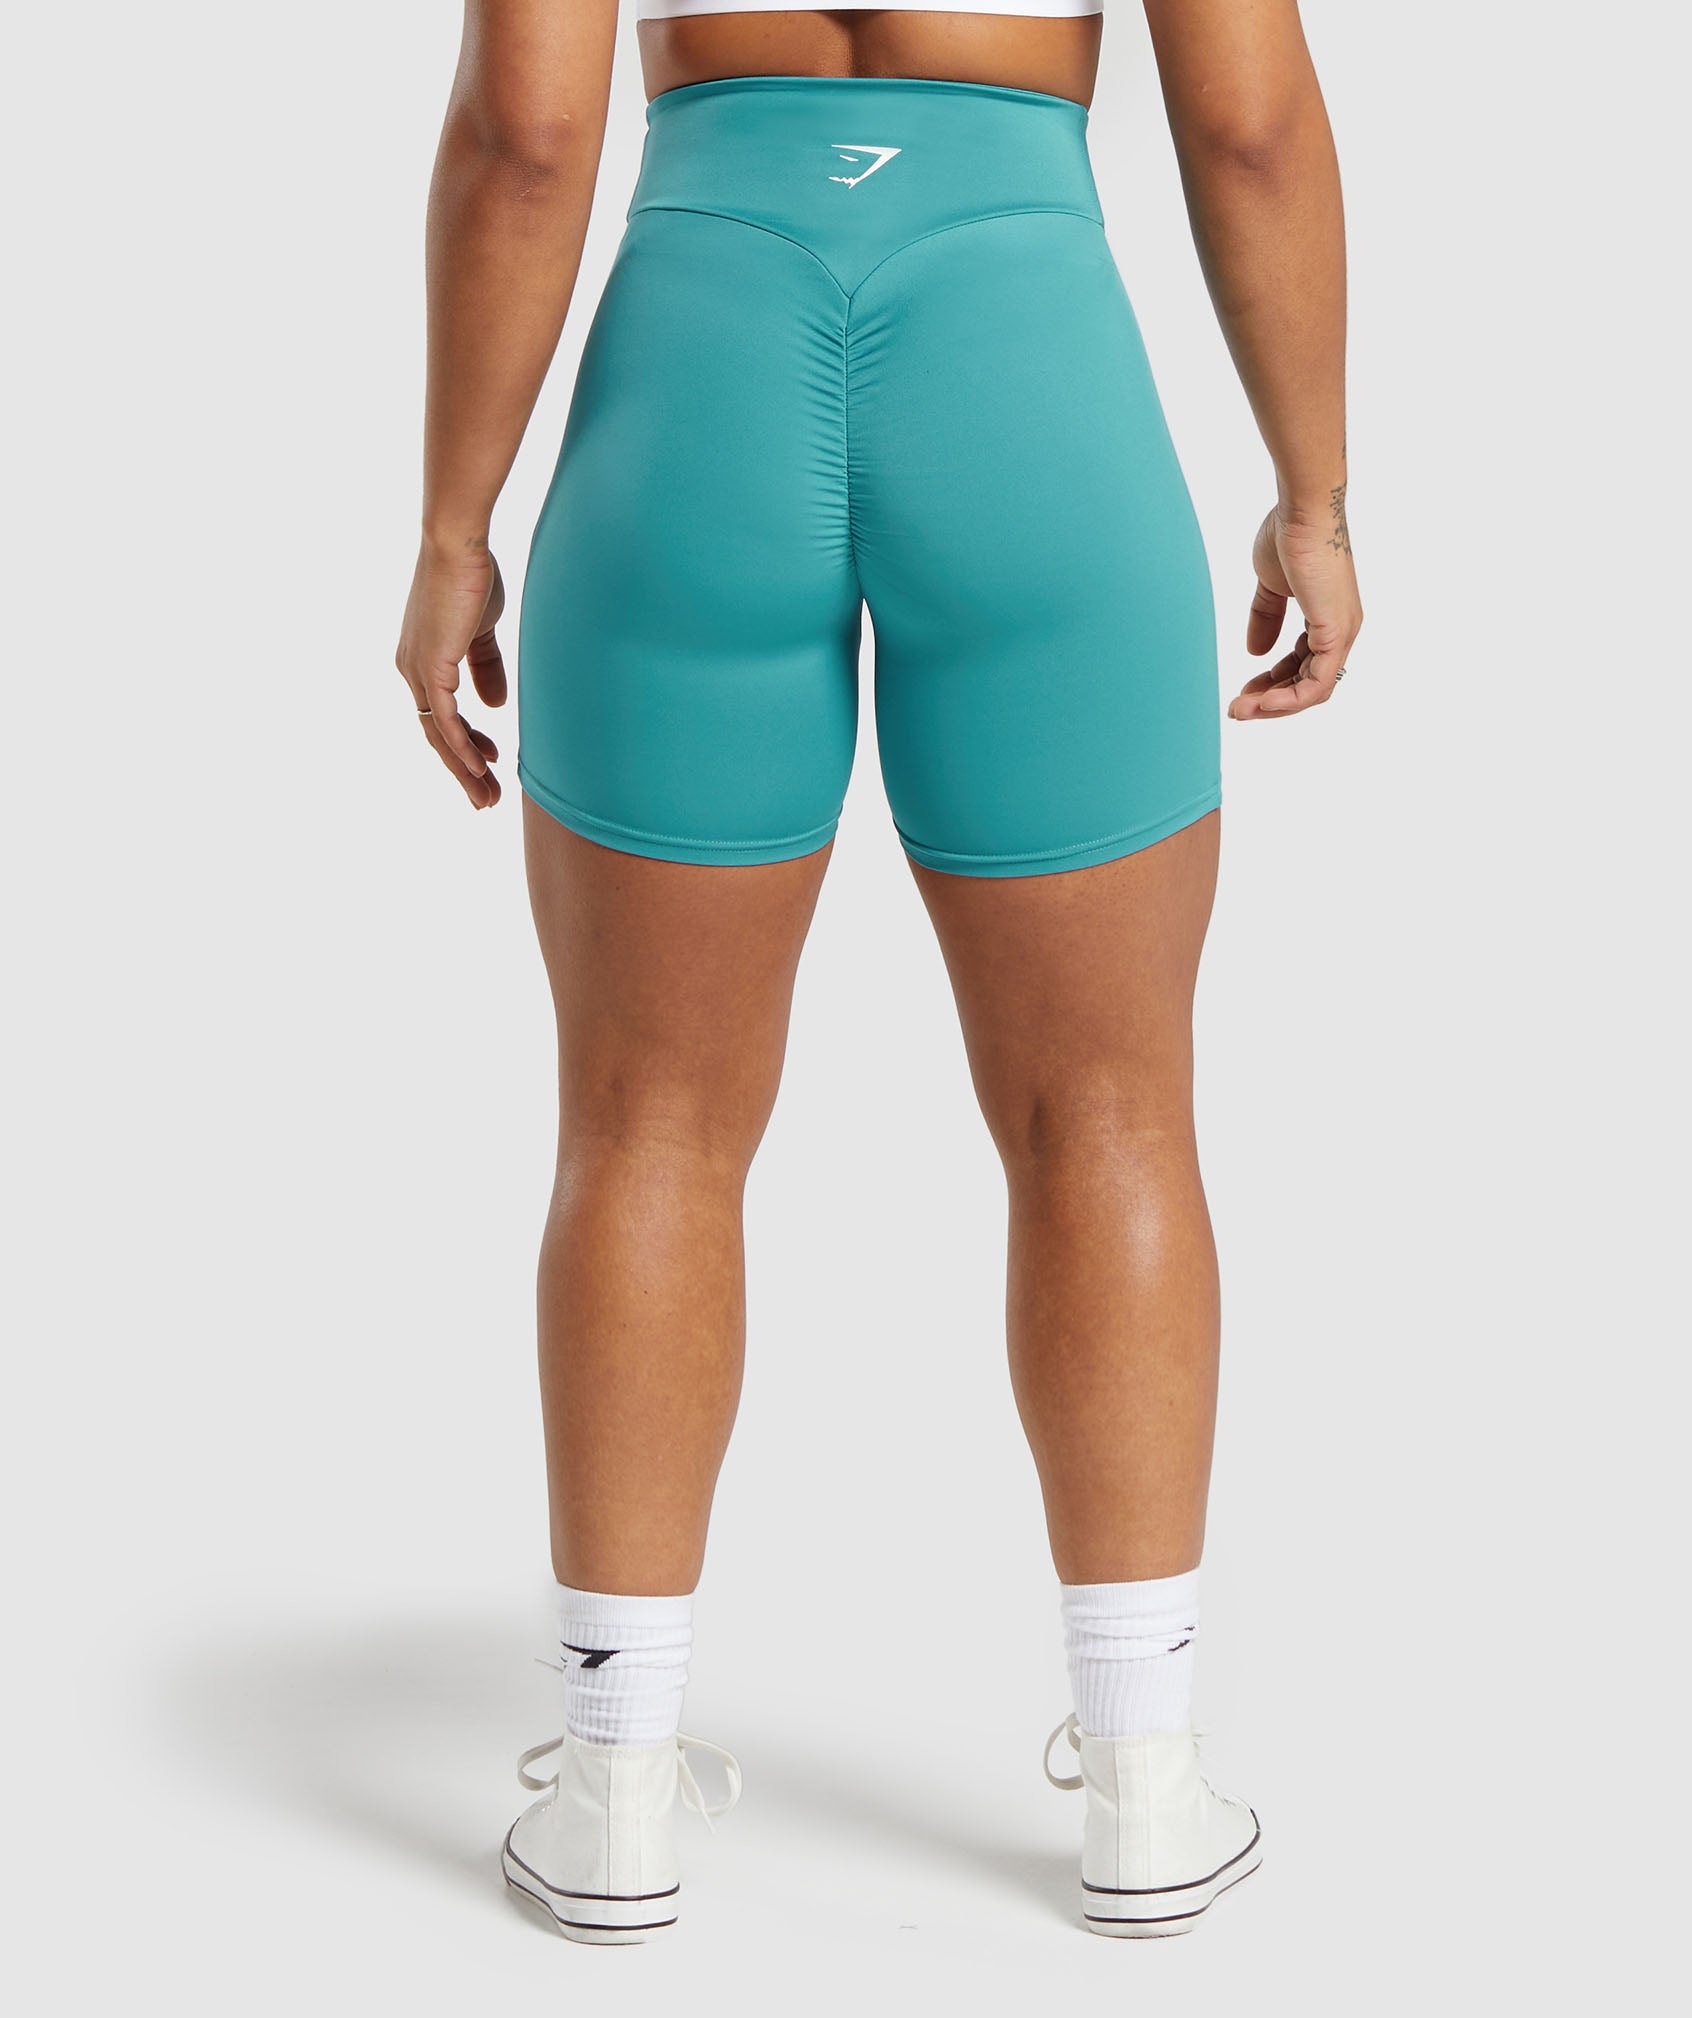 GS Power Tight Shorts in Bondi Teal - view 2